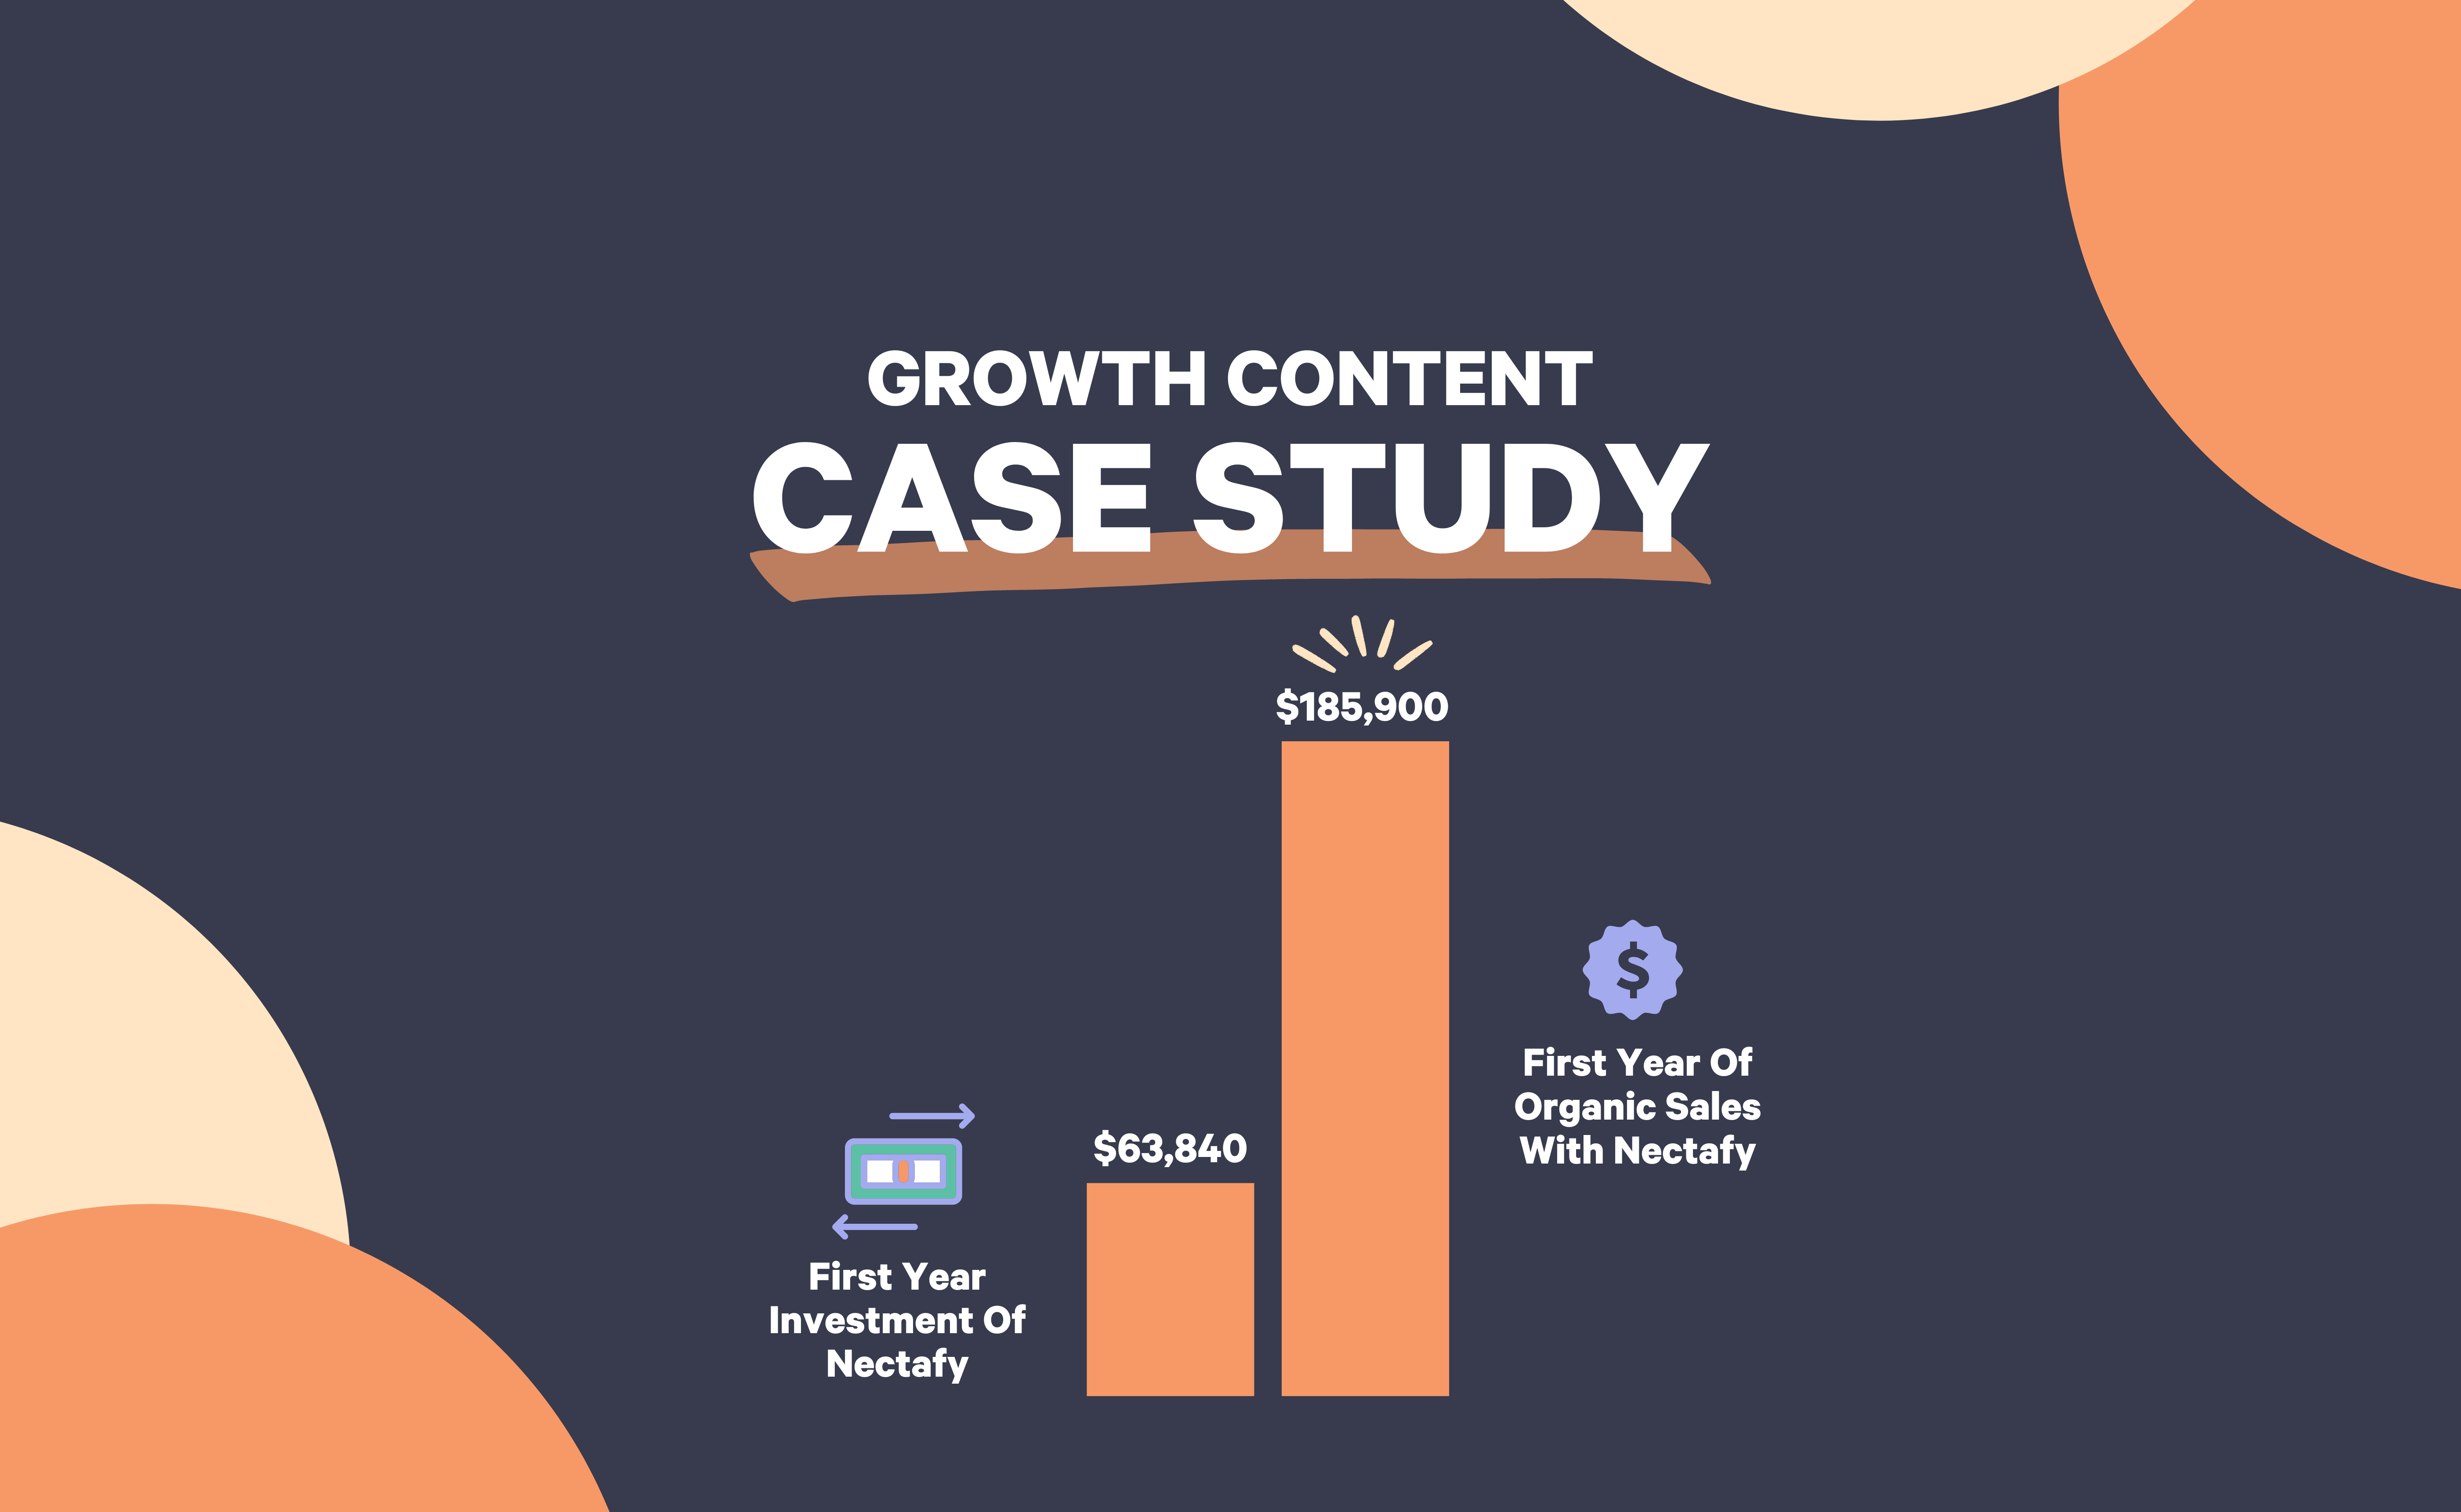 Growth Content Case Study - Nectafy